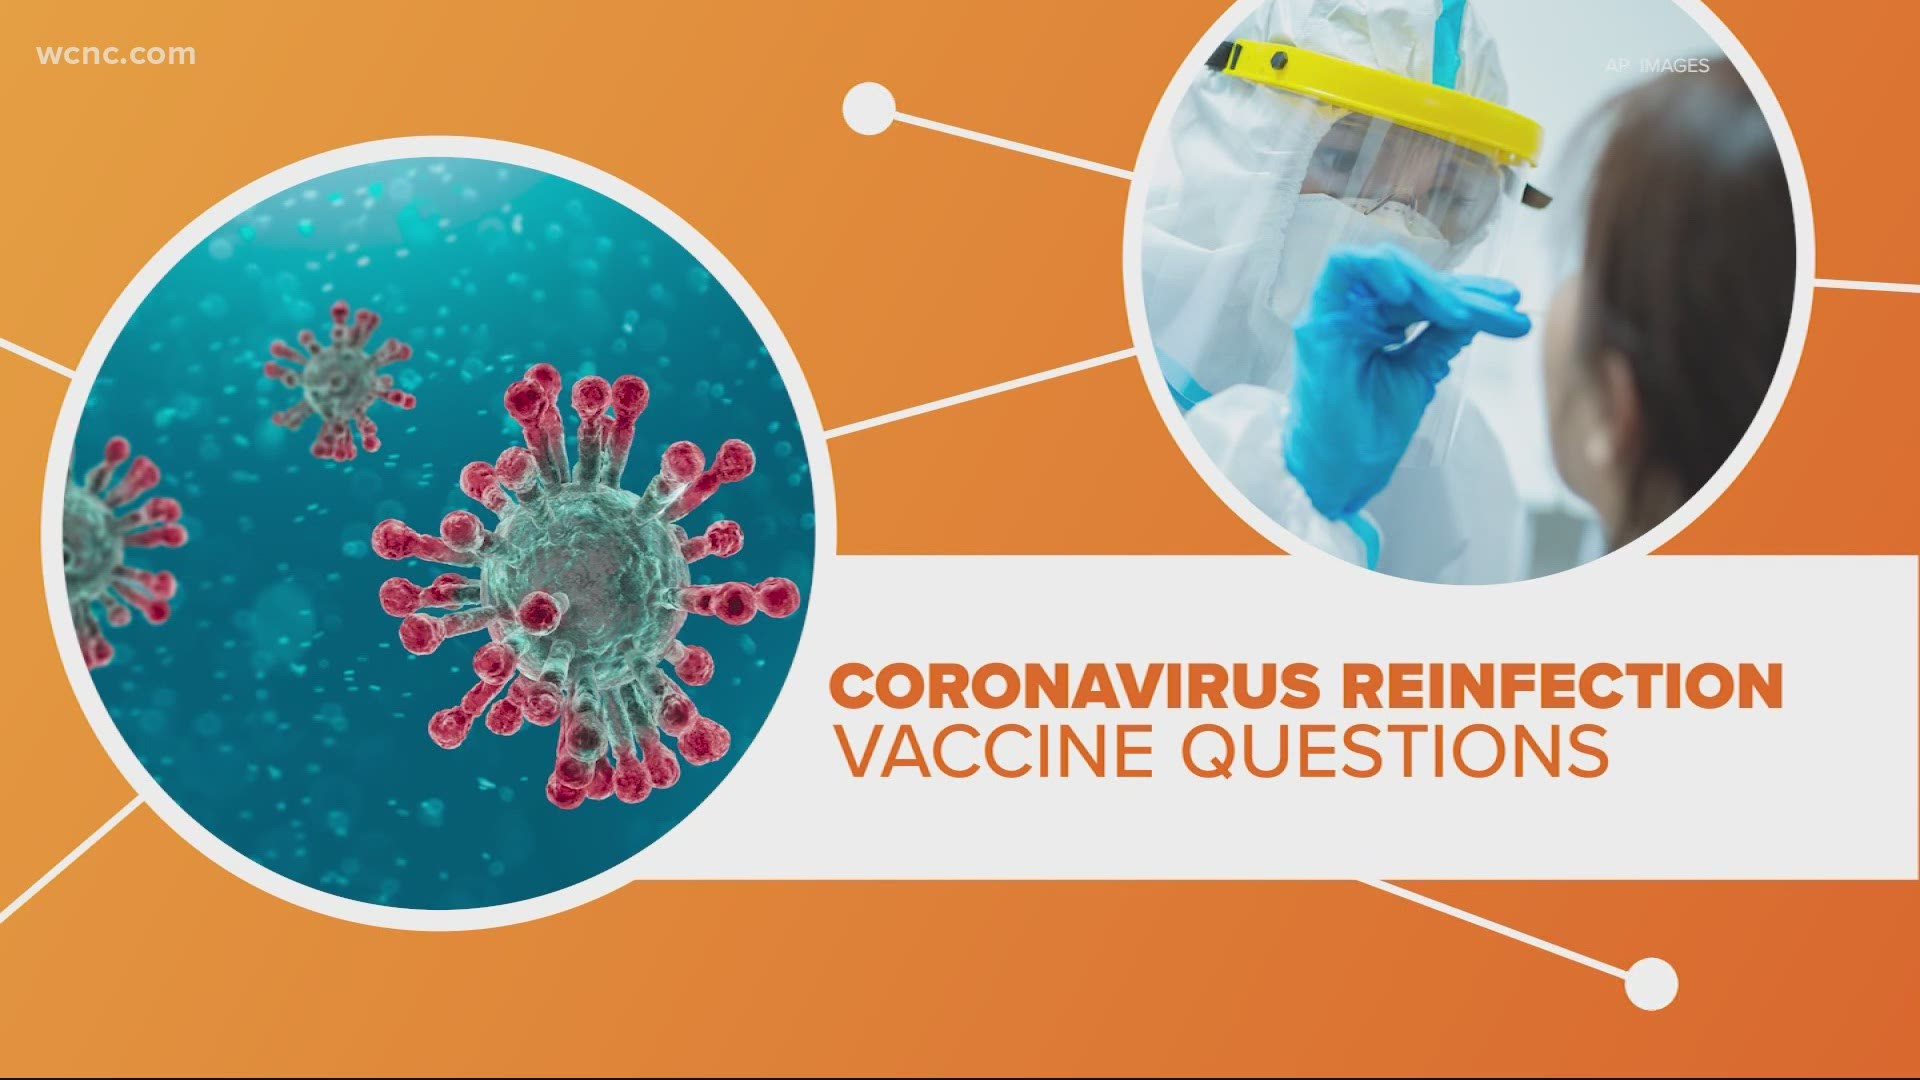 With reports of a U.S. man getting COVID-19 twice, there are now questions over whether a vaccine, when available, will actually work.